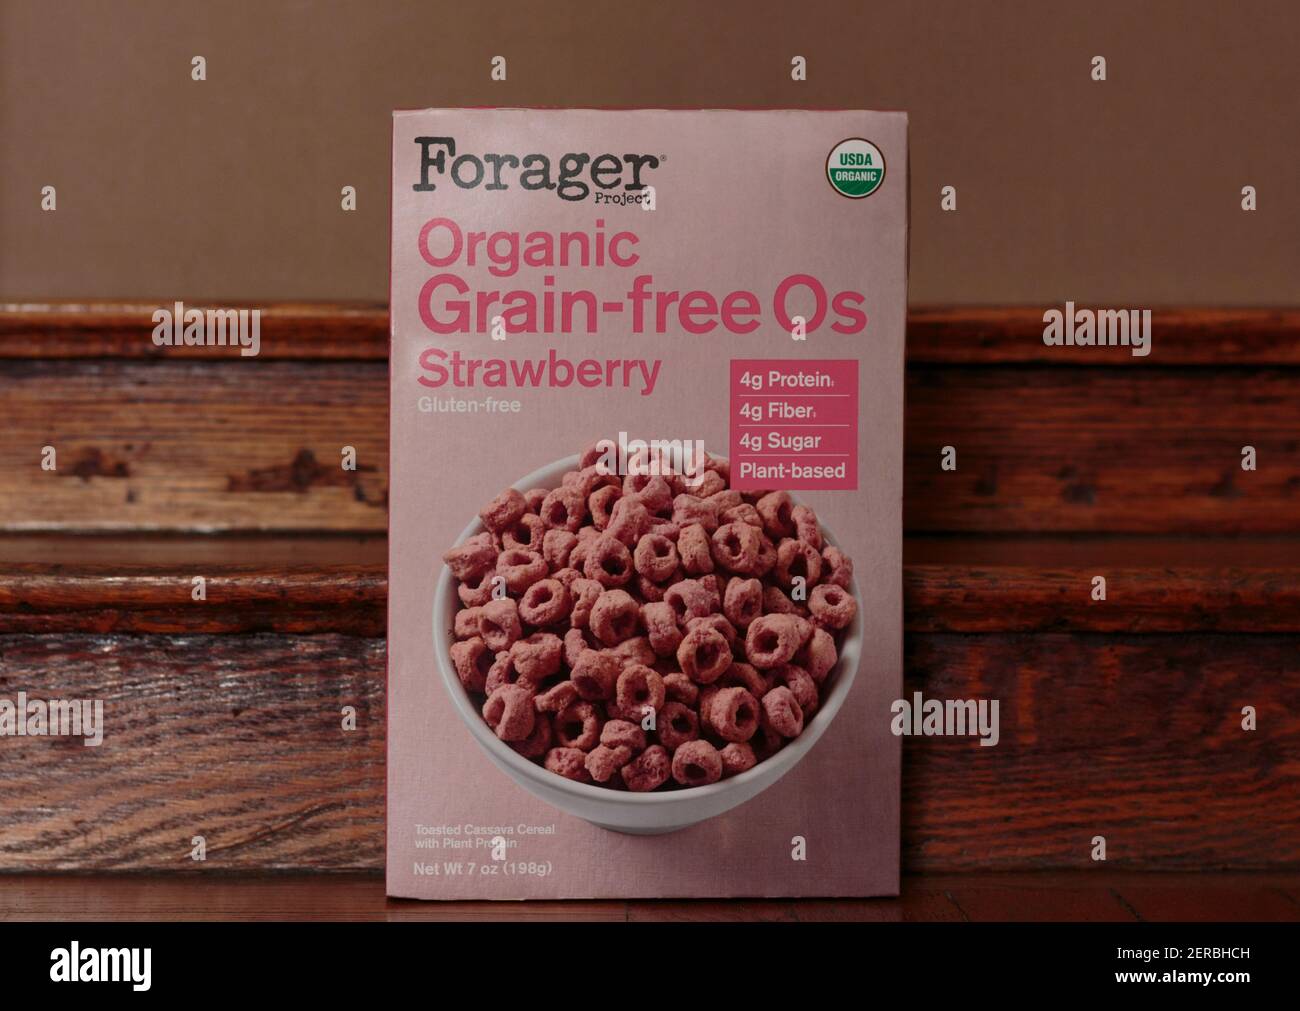 illustrative editorial of a box of Forager Project brand organic cassava grain-free strawberry flavored cereal with copy space Stock Photo